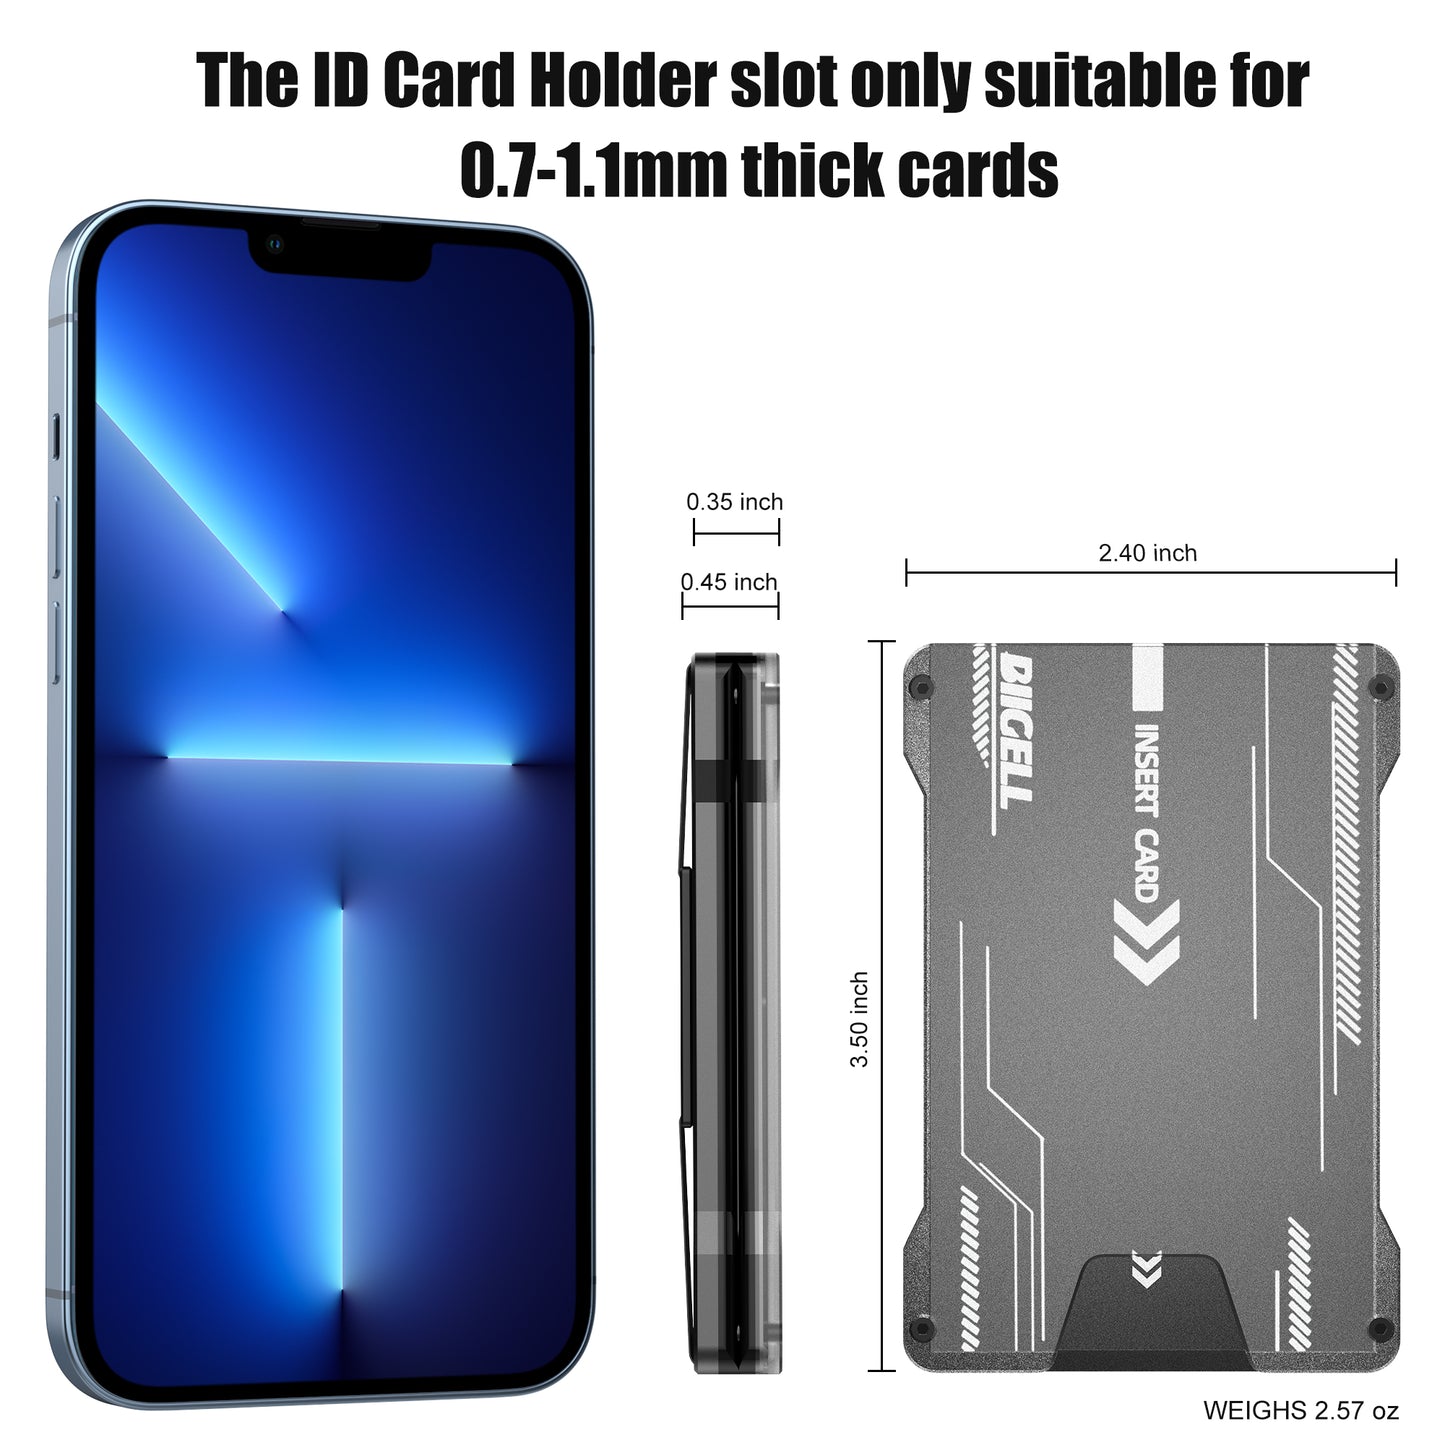 Wallet For Men - Slim Aluminum Metal Mens Wallets with 1 Clear window ID Badge Holder, RFID Blocking, Holds up 15 Cards with Cash Strap. Ultra-Thin Credit Card Holder Minimalist Wallet